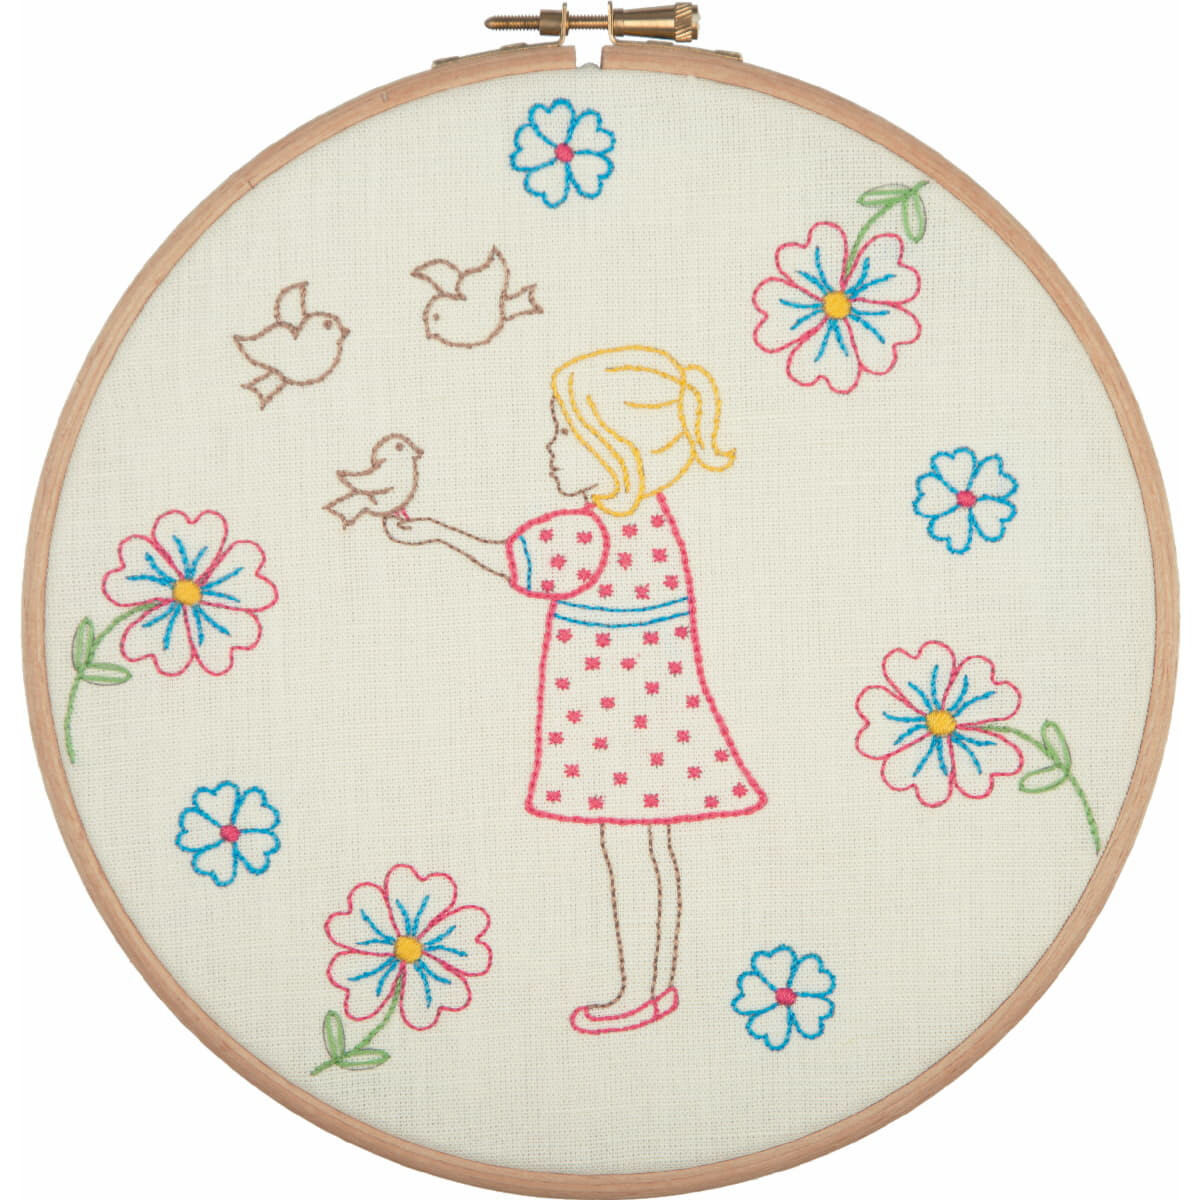 Anchor stamped freestyle stitch kit with hoop...